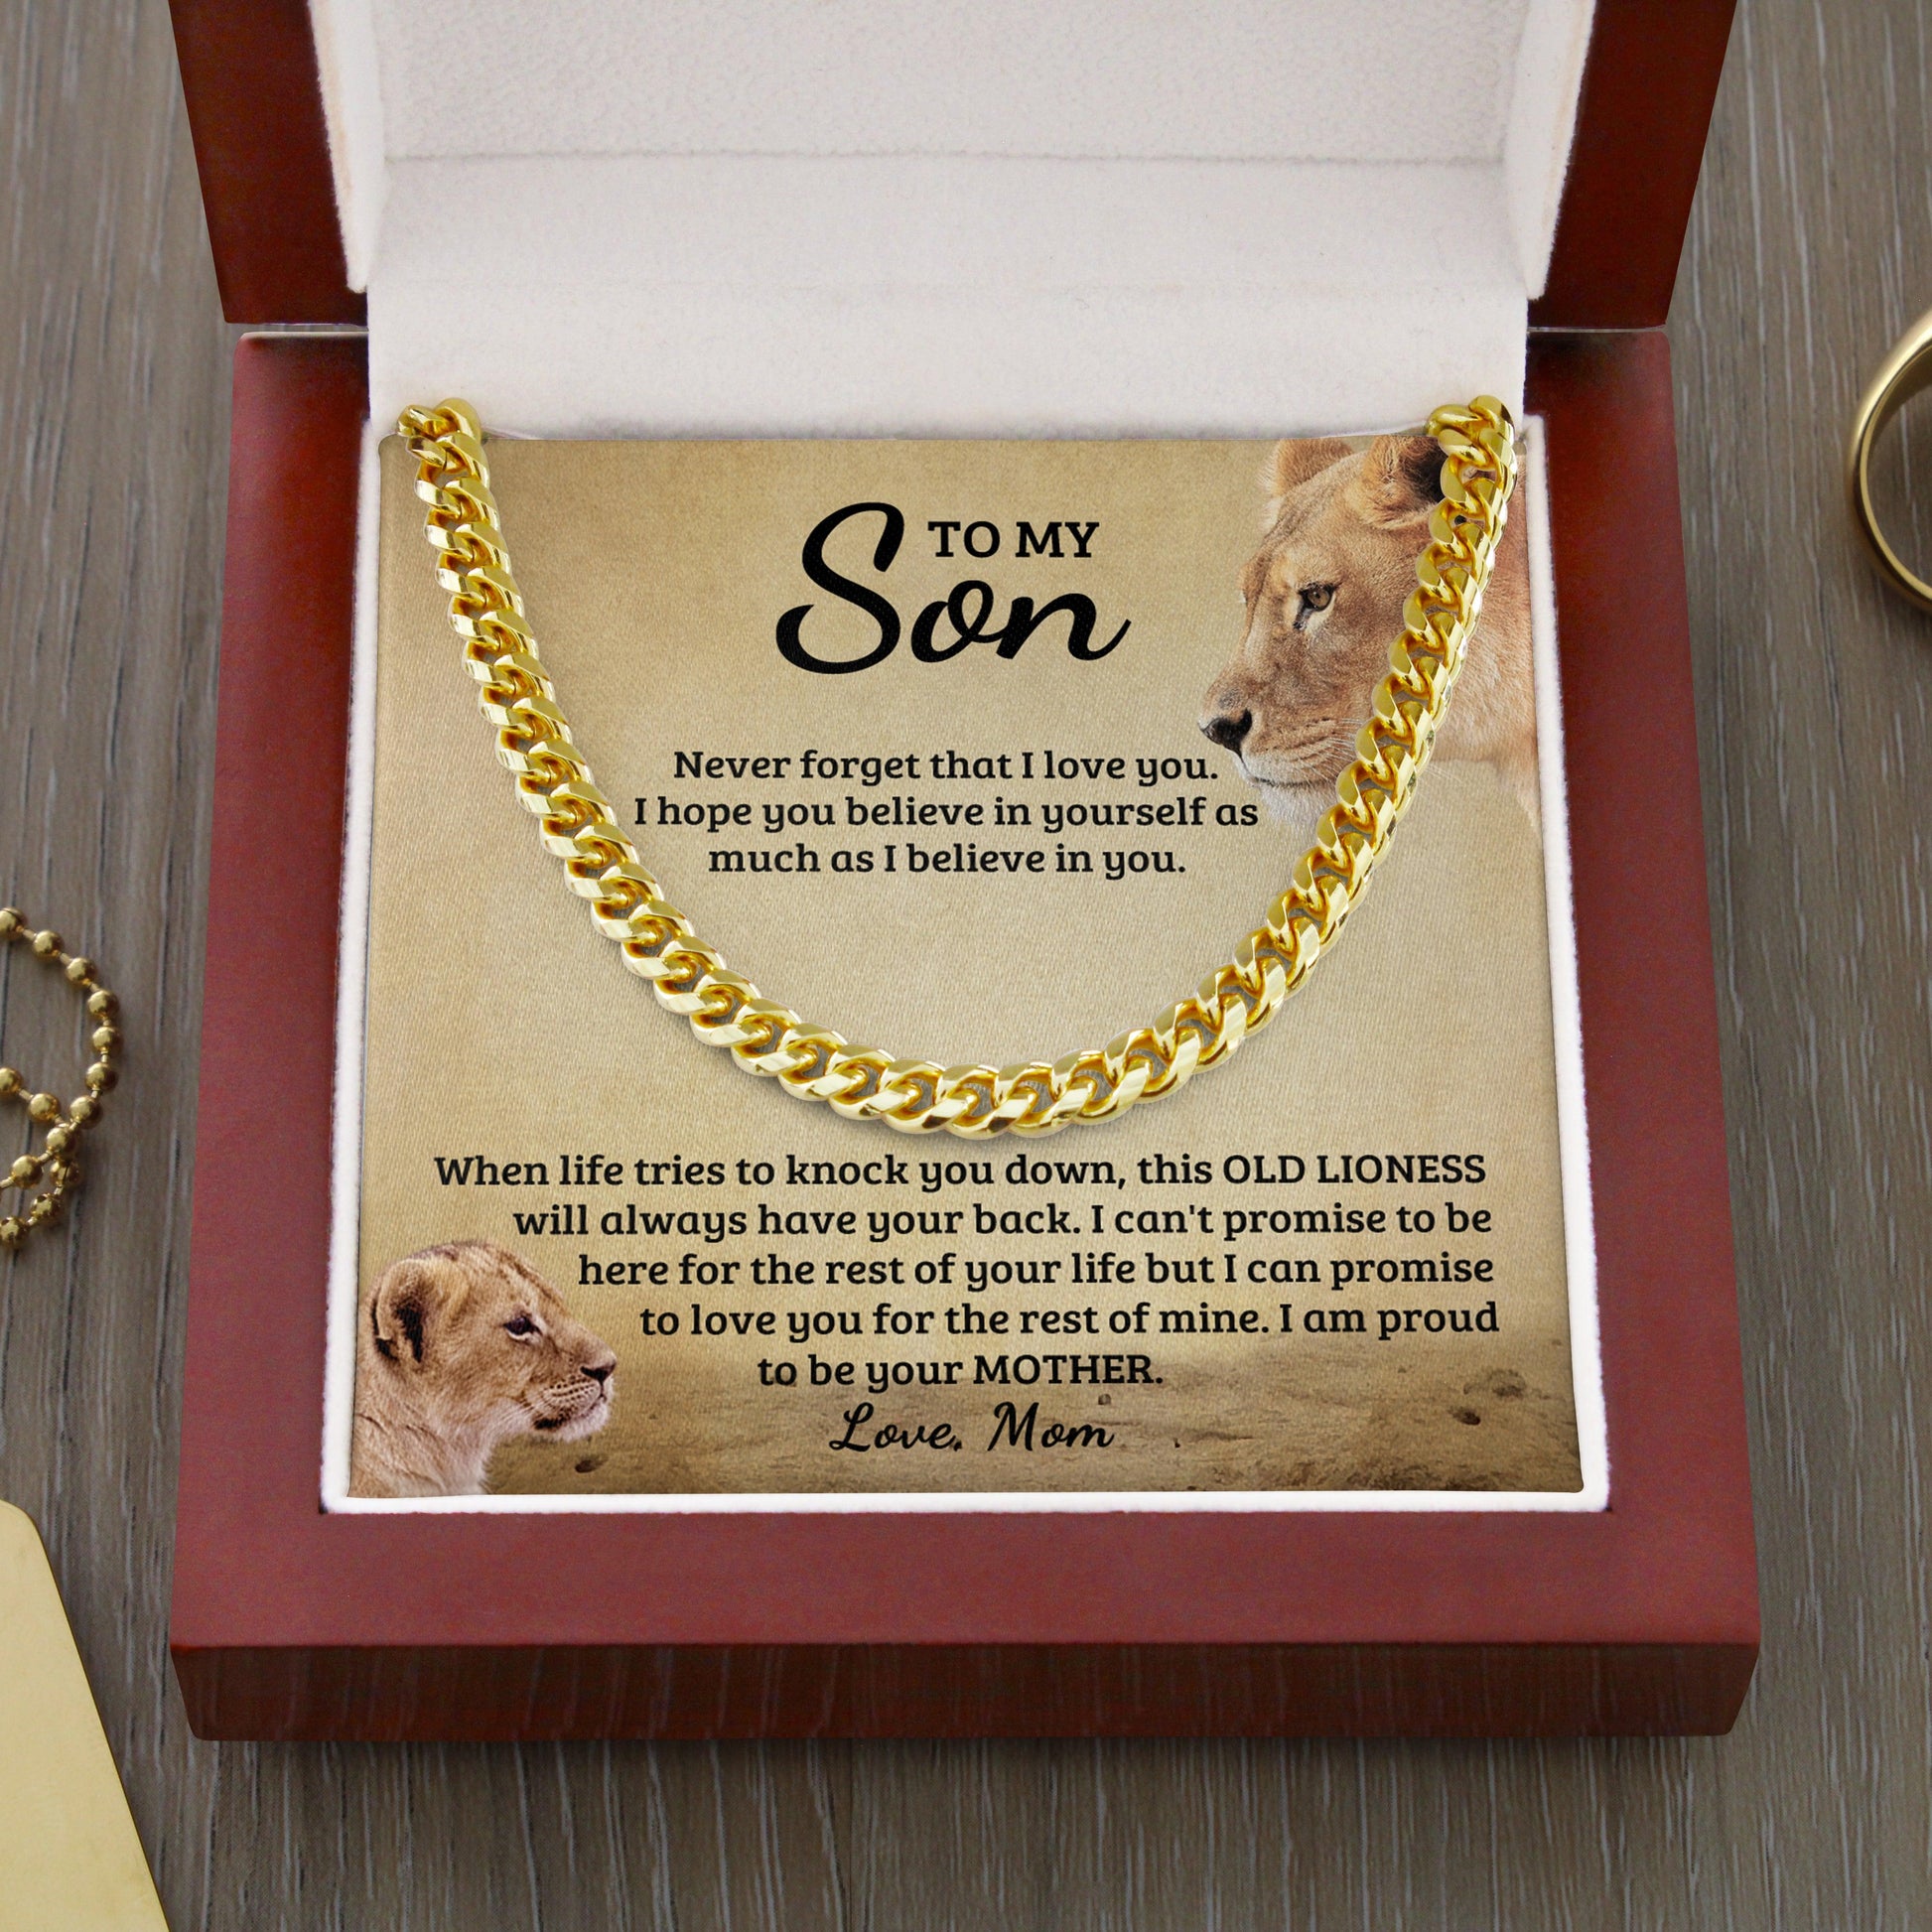 Jewelry gifts Son - Watch You - Cuban Link Chain - Belesmé - Memorable Jewelry Gifts 